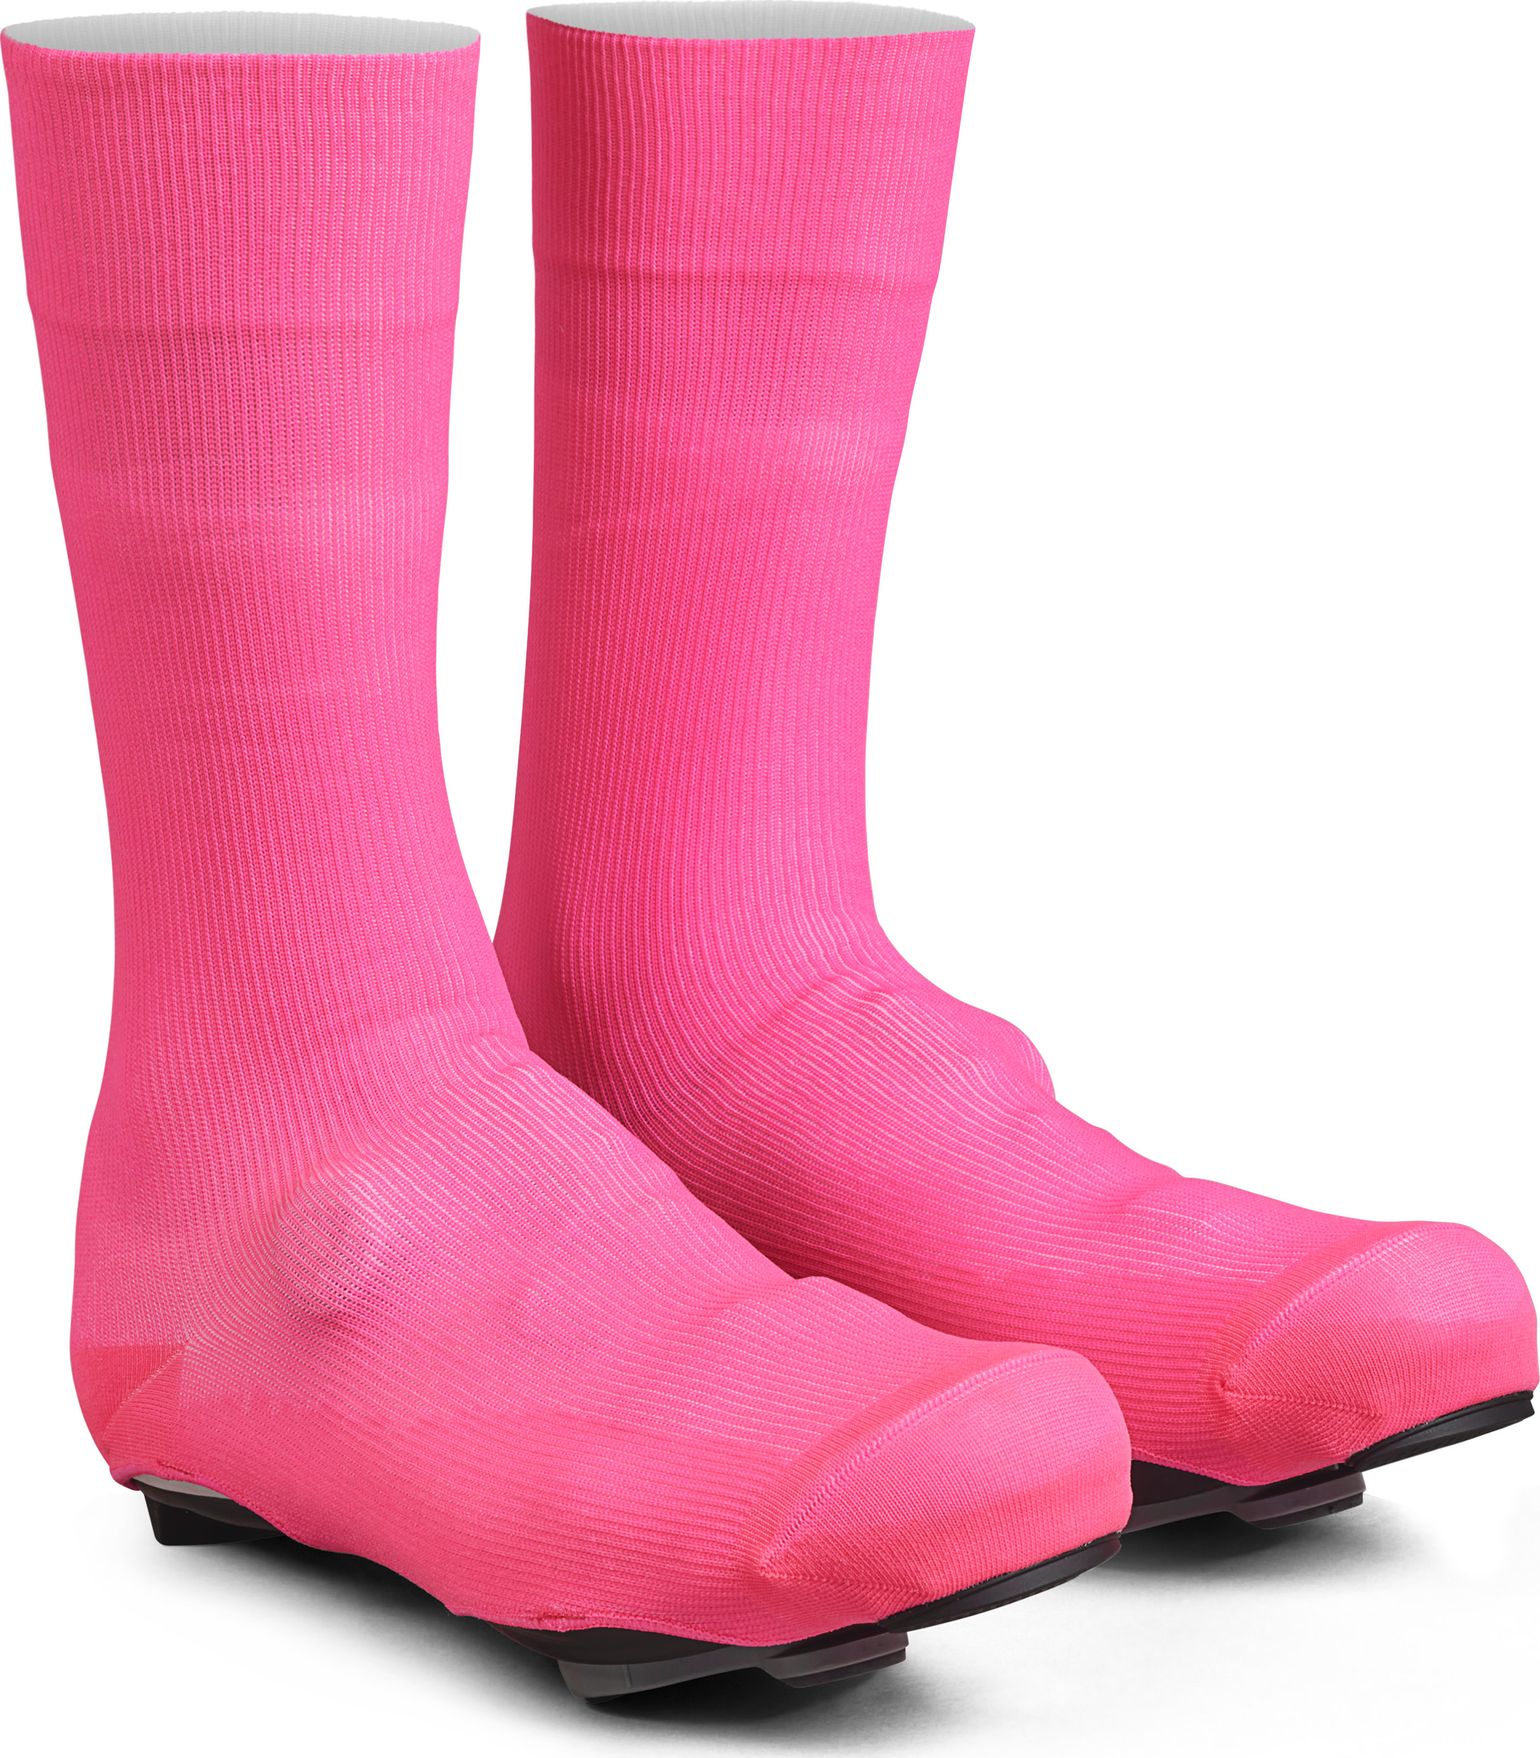 Gripgrab Flandrien Waterproof Knitted Road Shoe Covers Pink